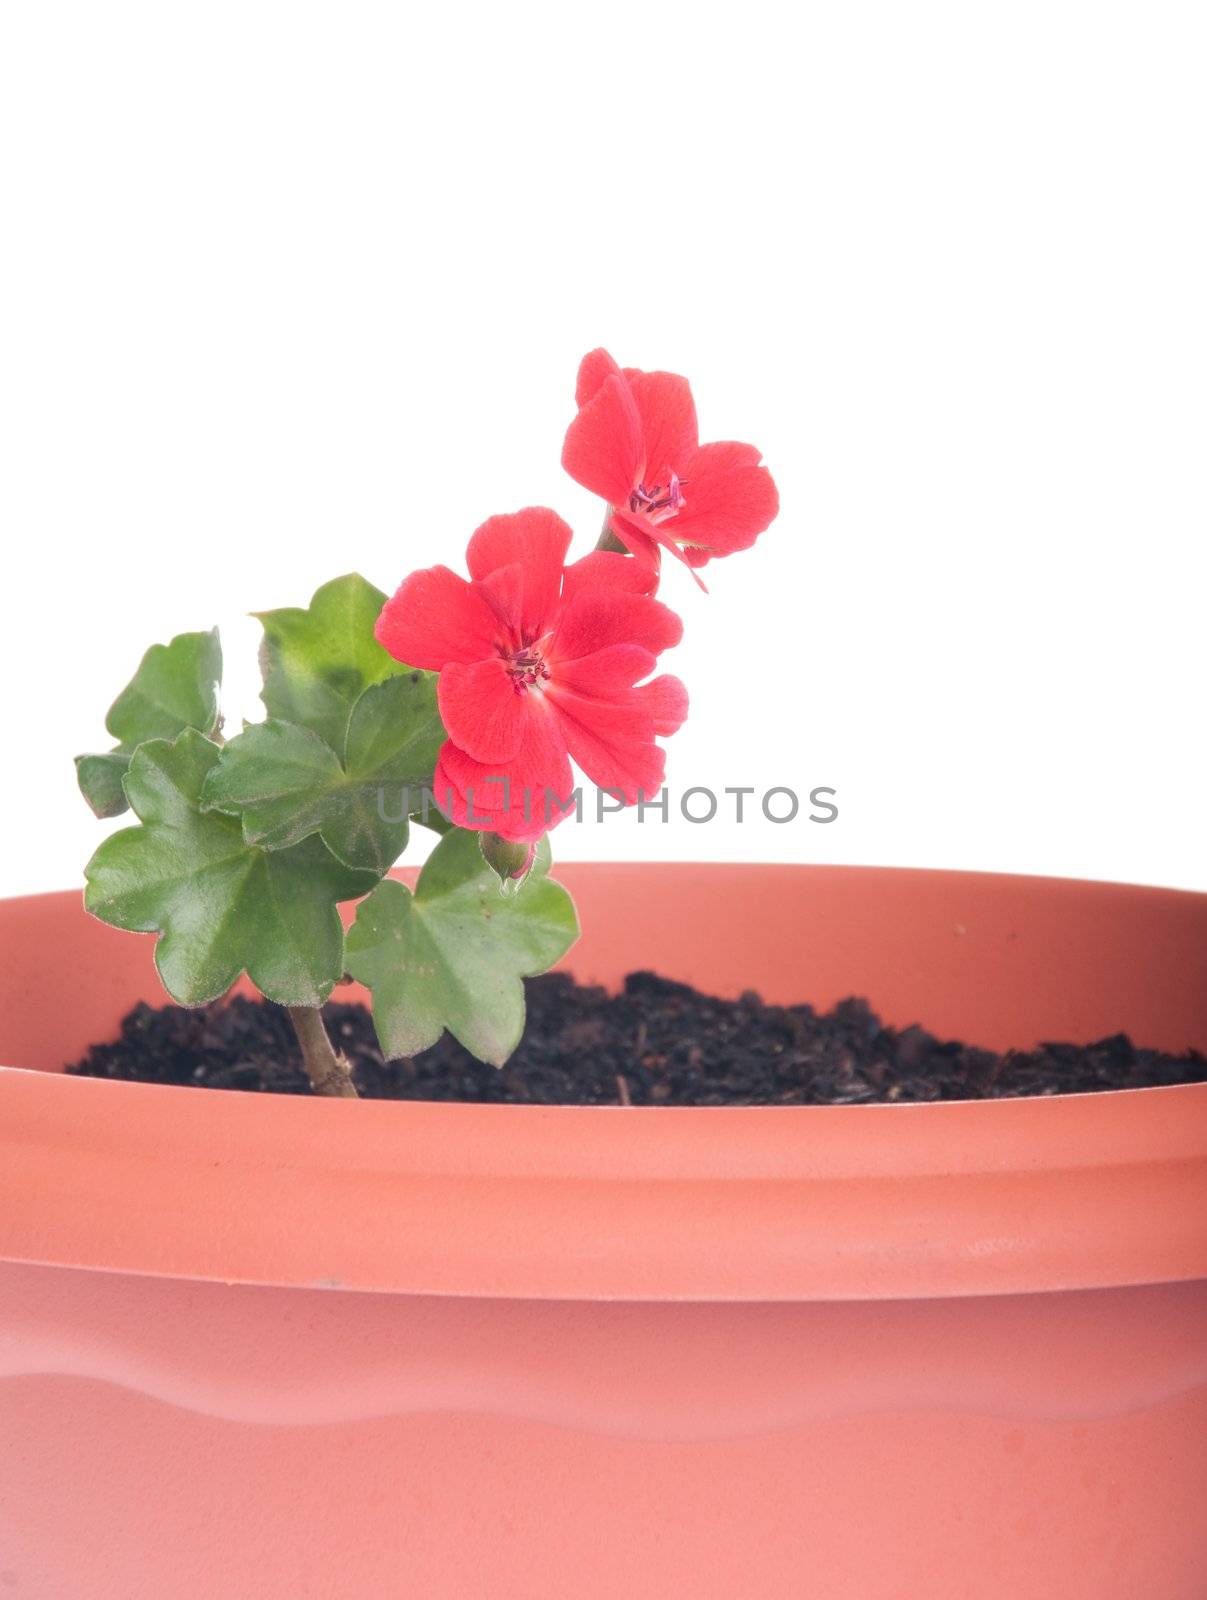 red geranium flowers in a pot isolated on white background (close-up)